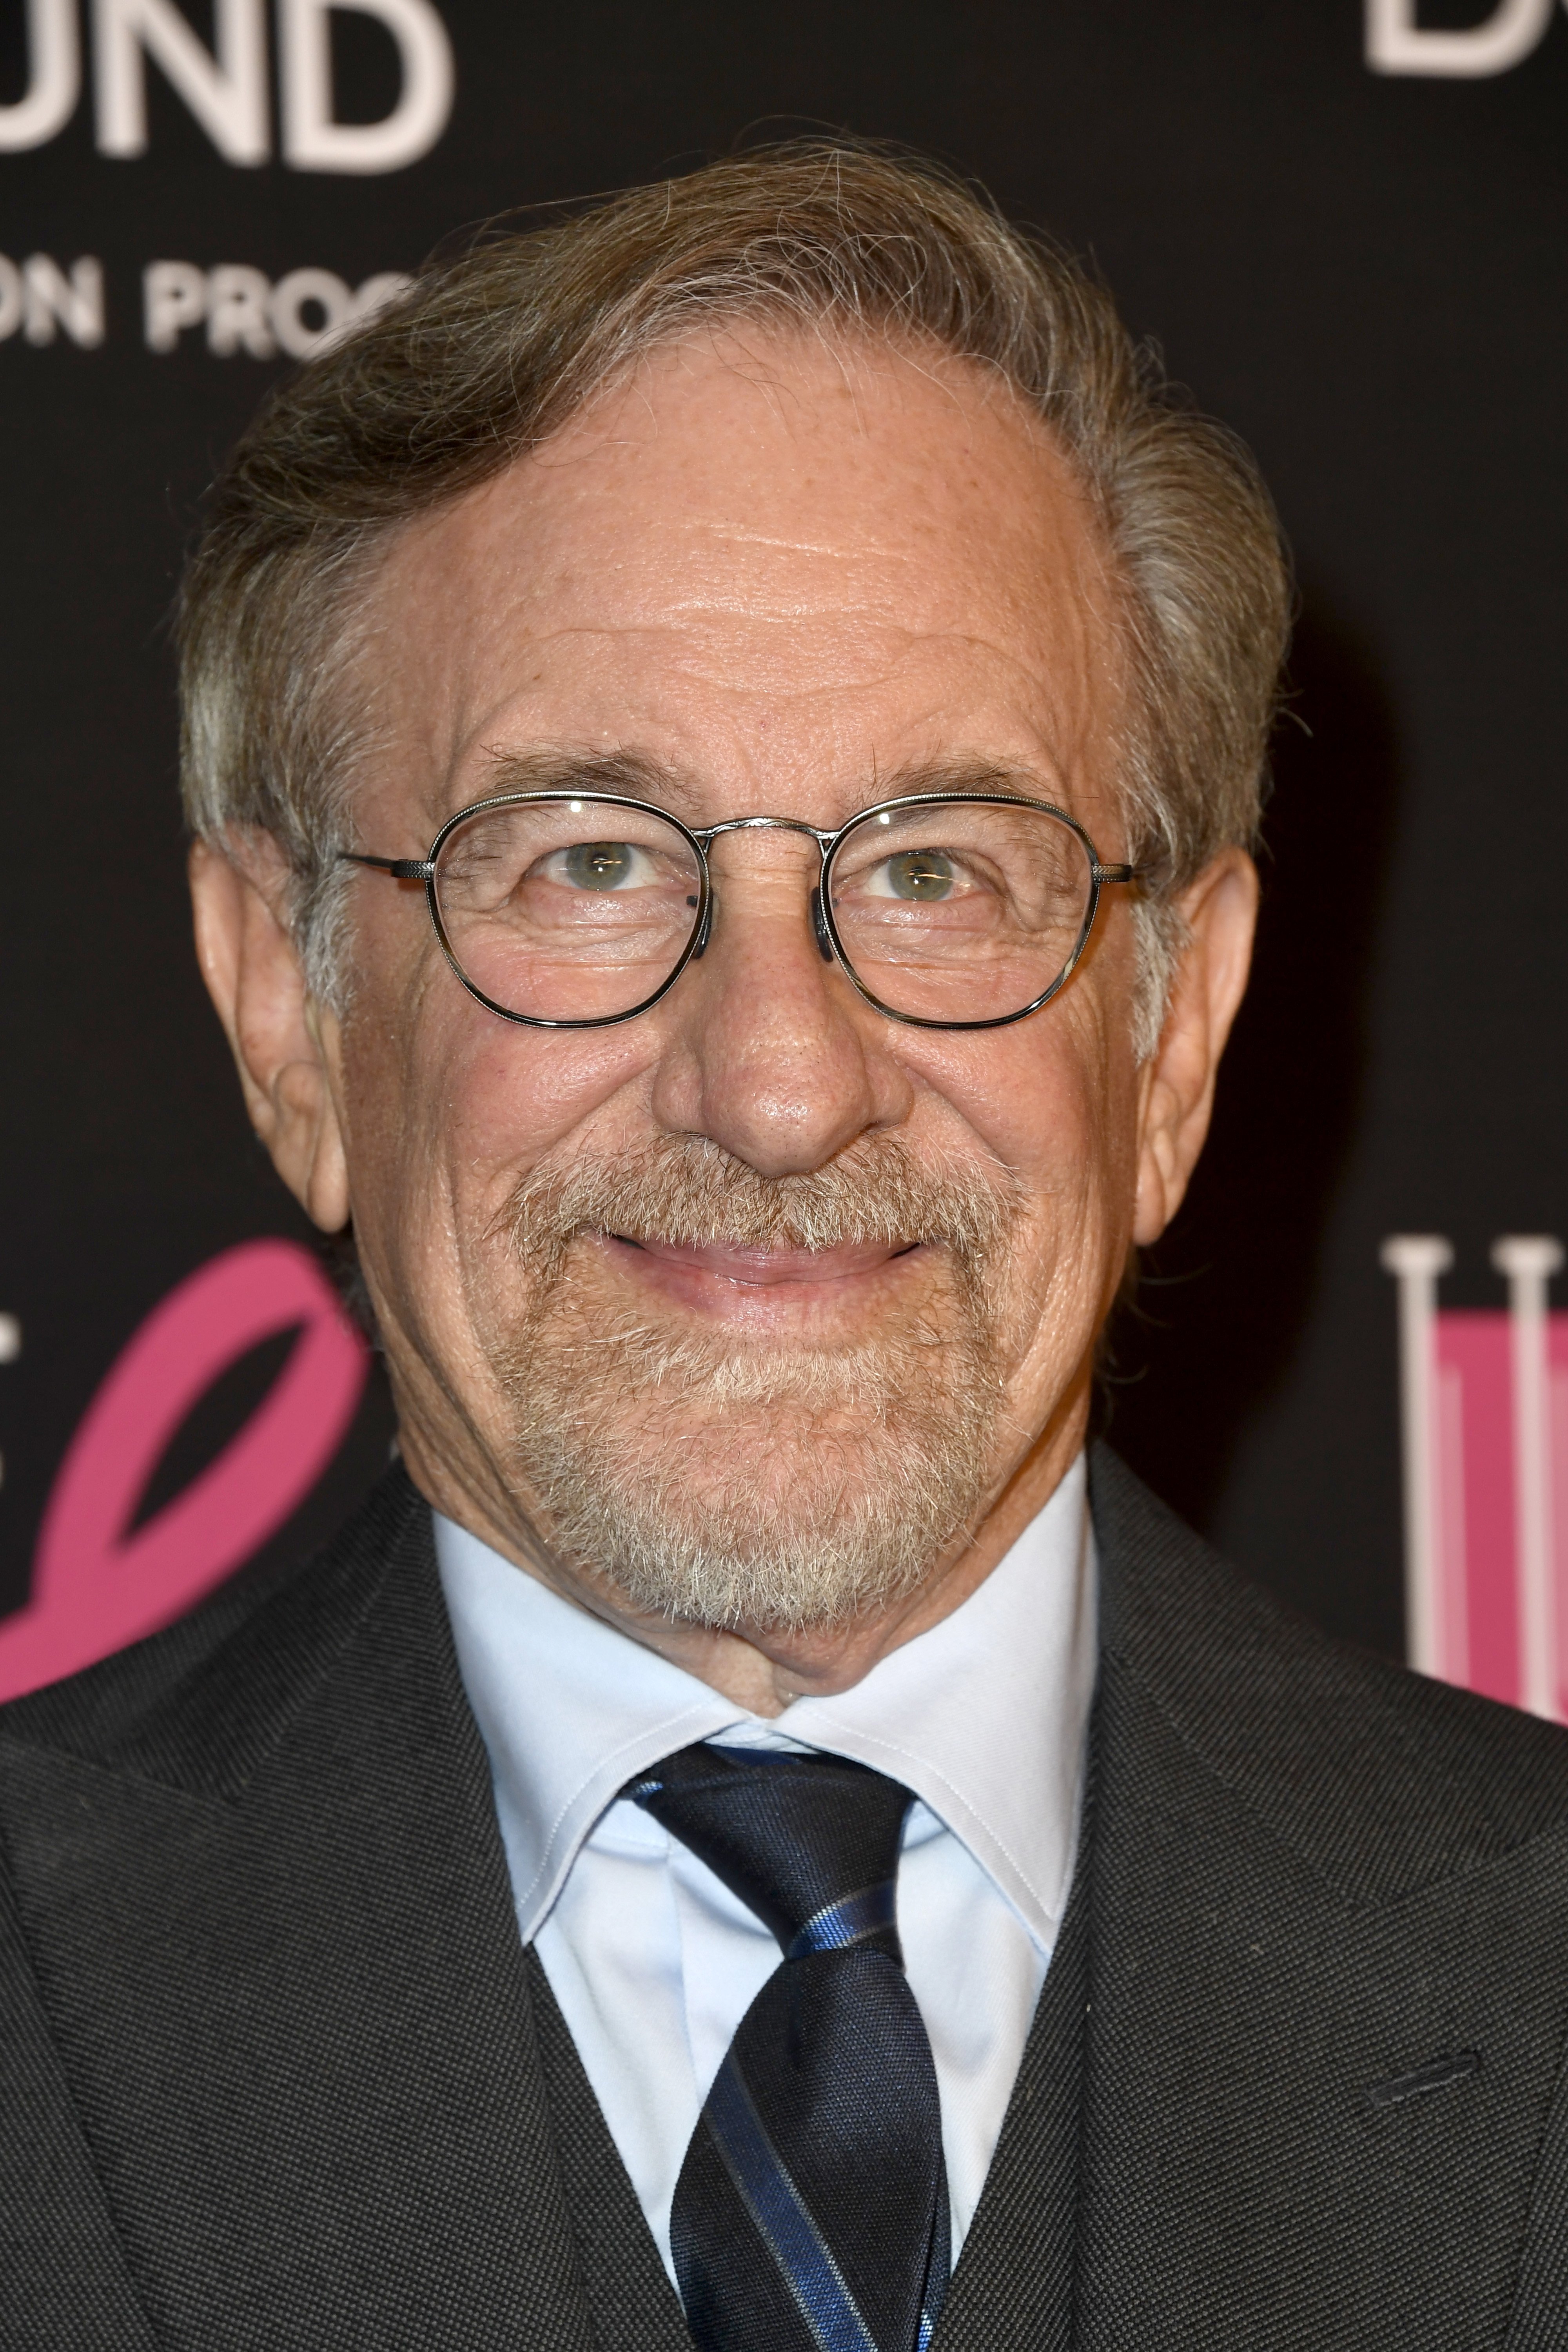 Steven Spielberg attends The Women's Cancer Research Fund's Benefit Gala on February 28, 2019 | Photo: GettyImage